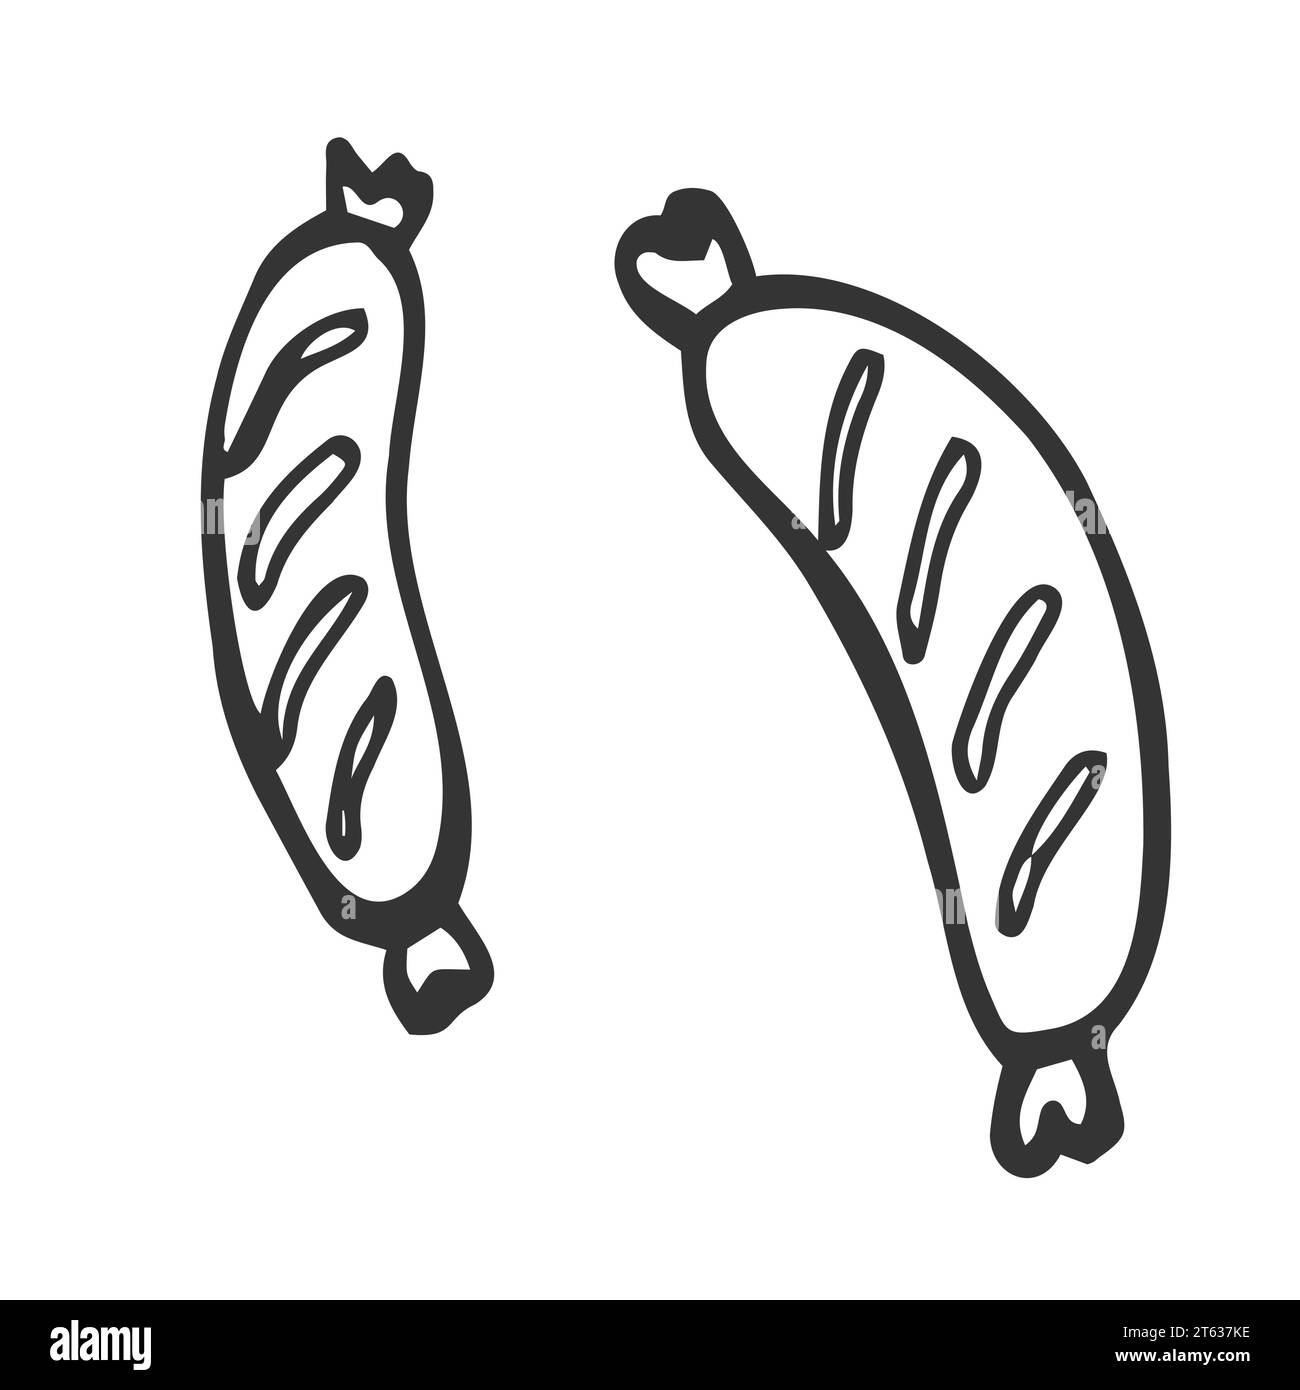 Grilled sausage hand drawn outline doodle icon. Vector sketch illustration of sausage Stock Vector